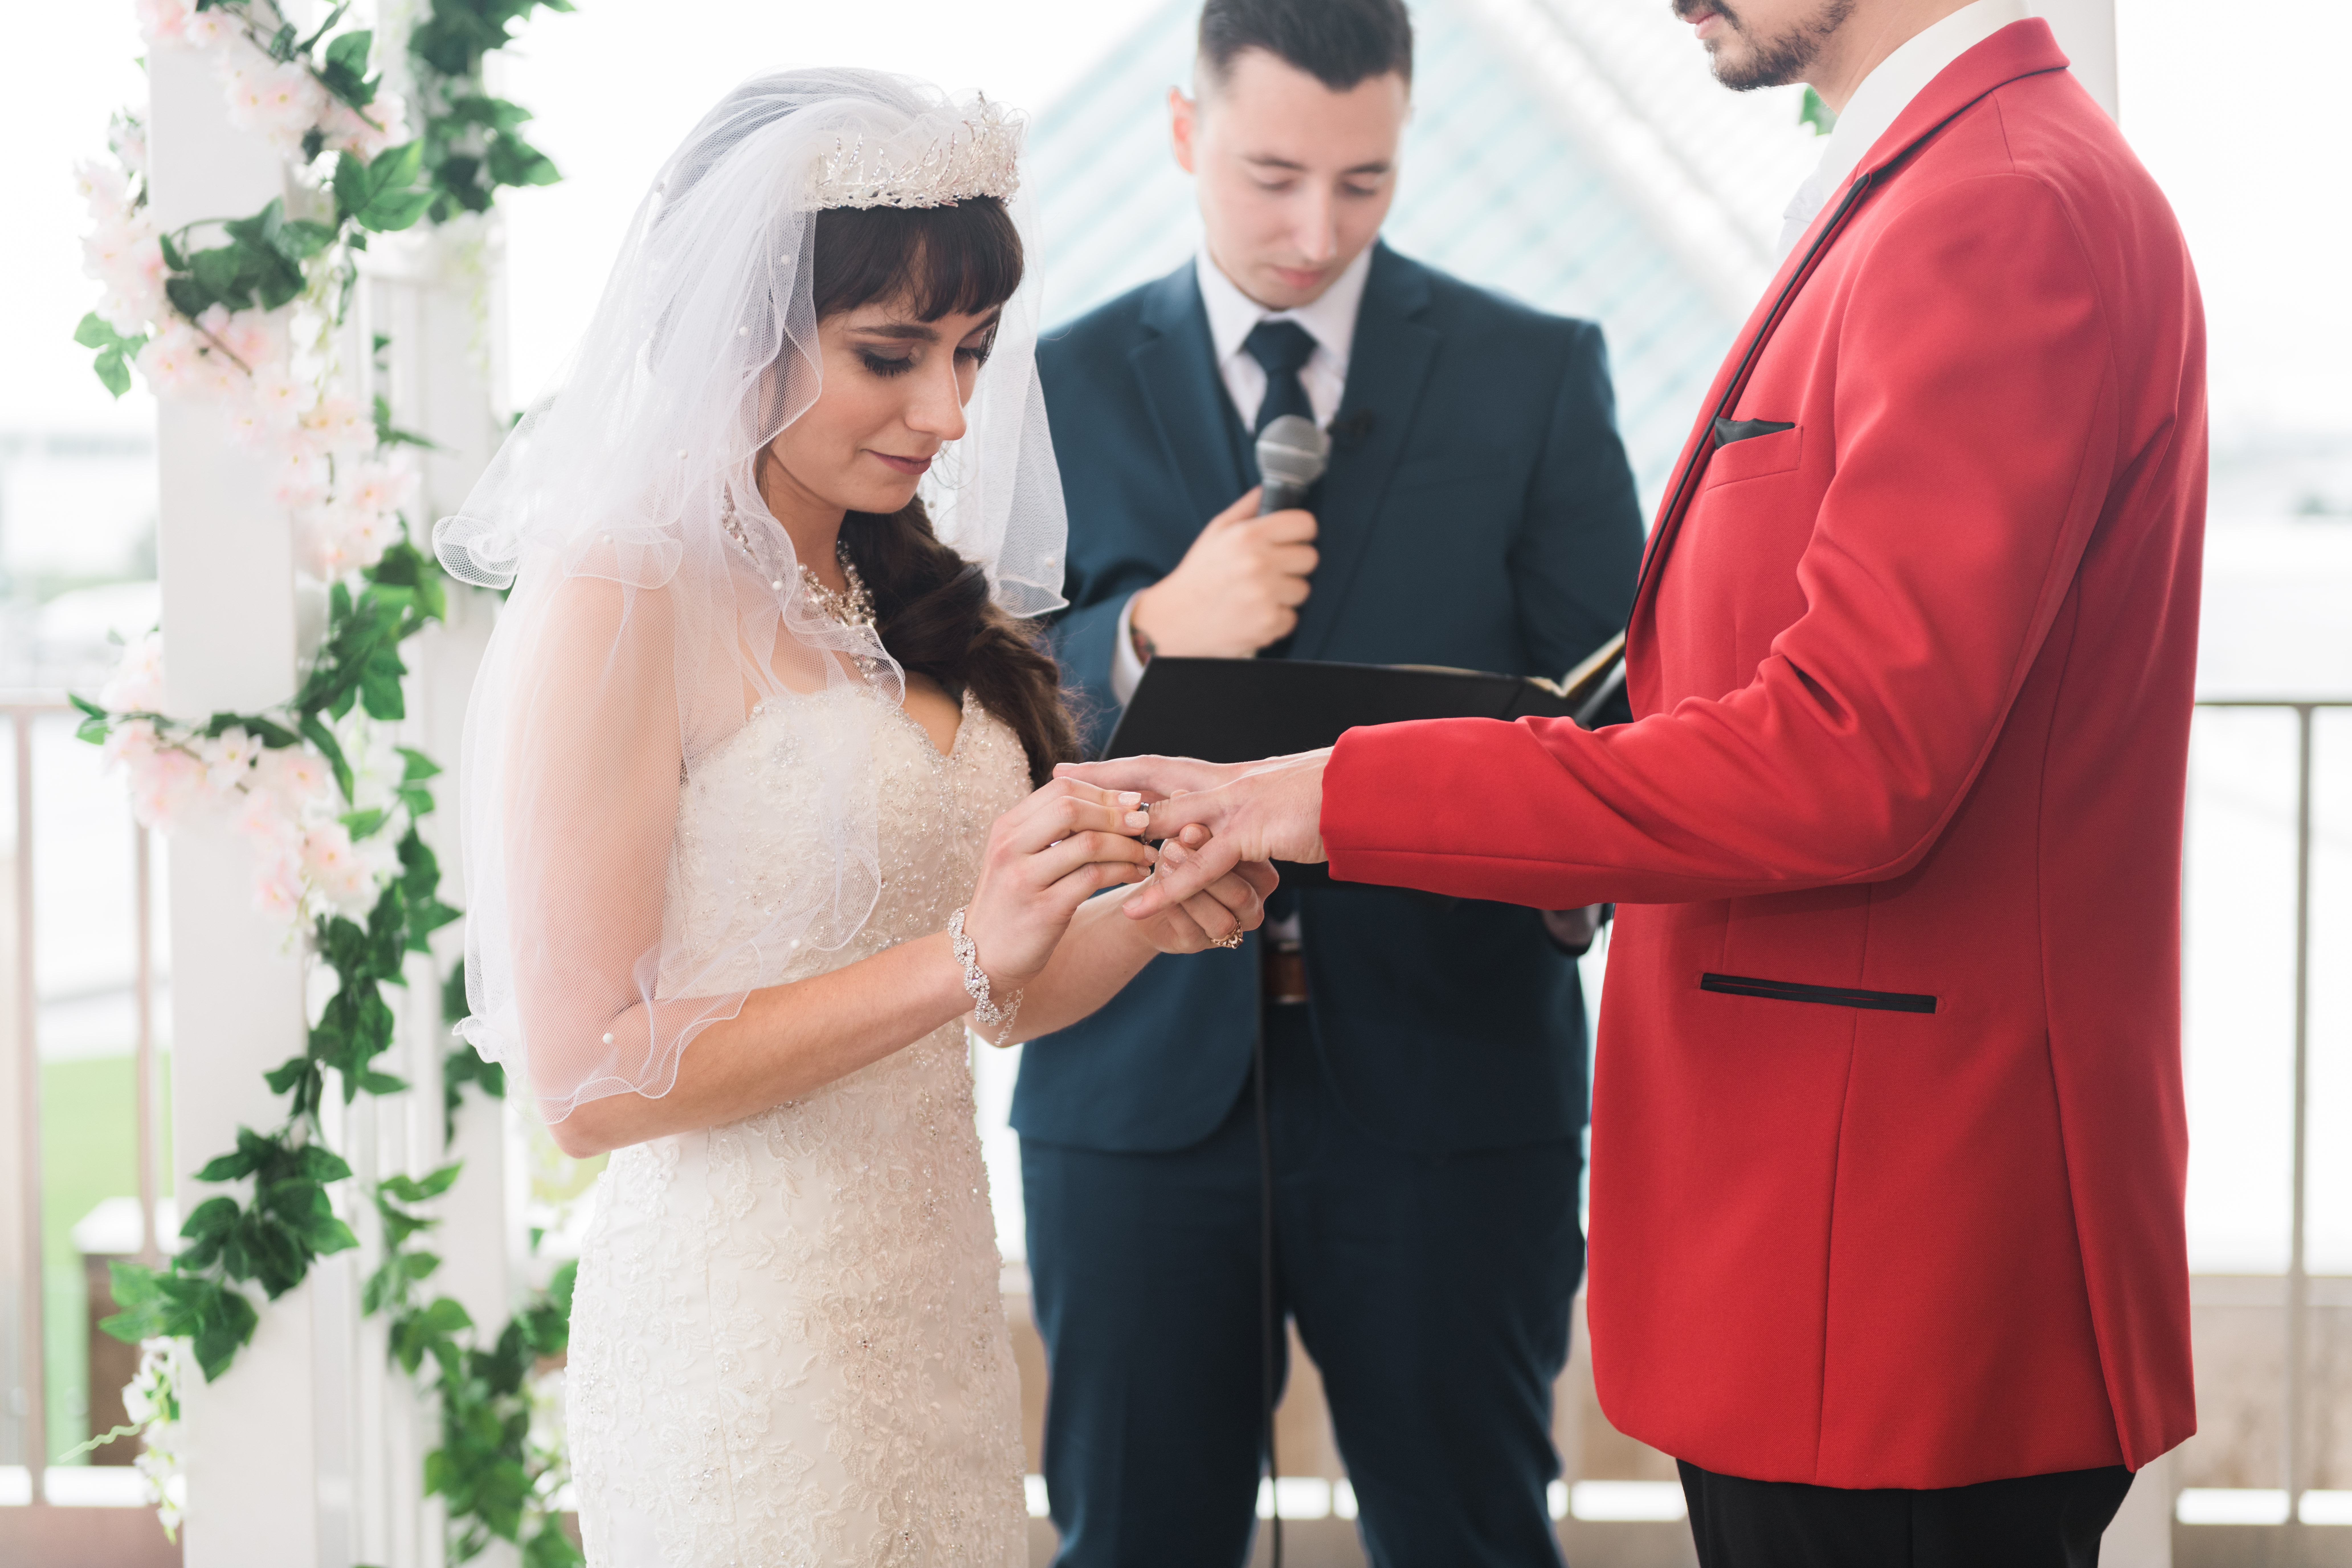 Bride putting on groom's wedding ring during ceremony